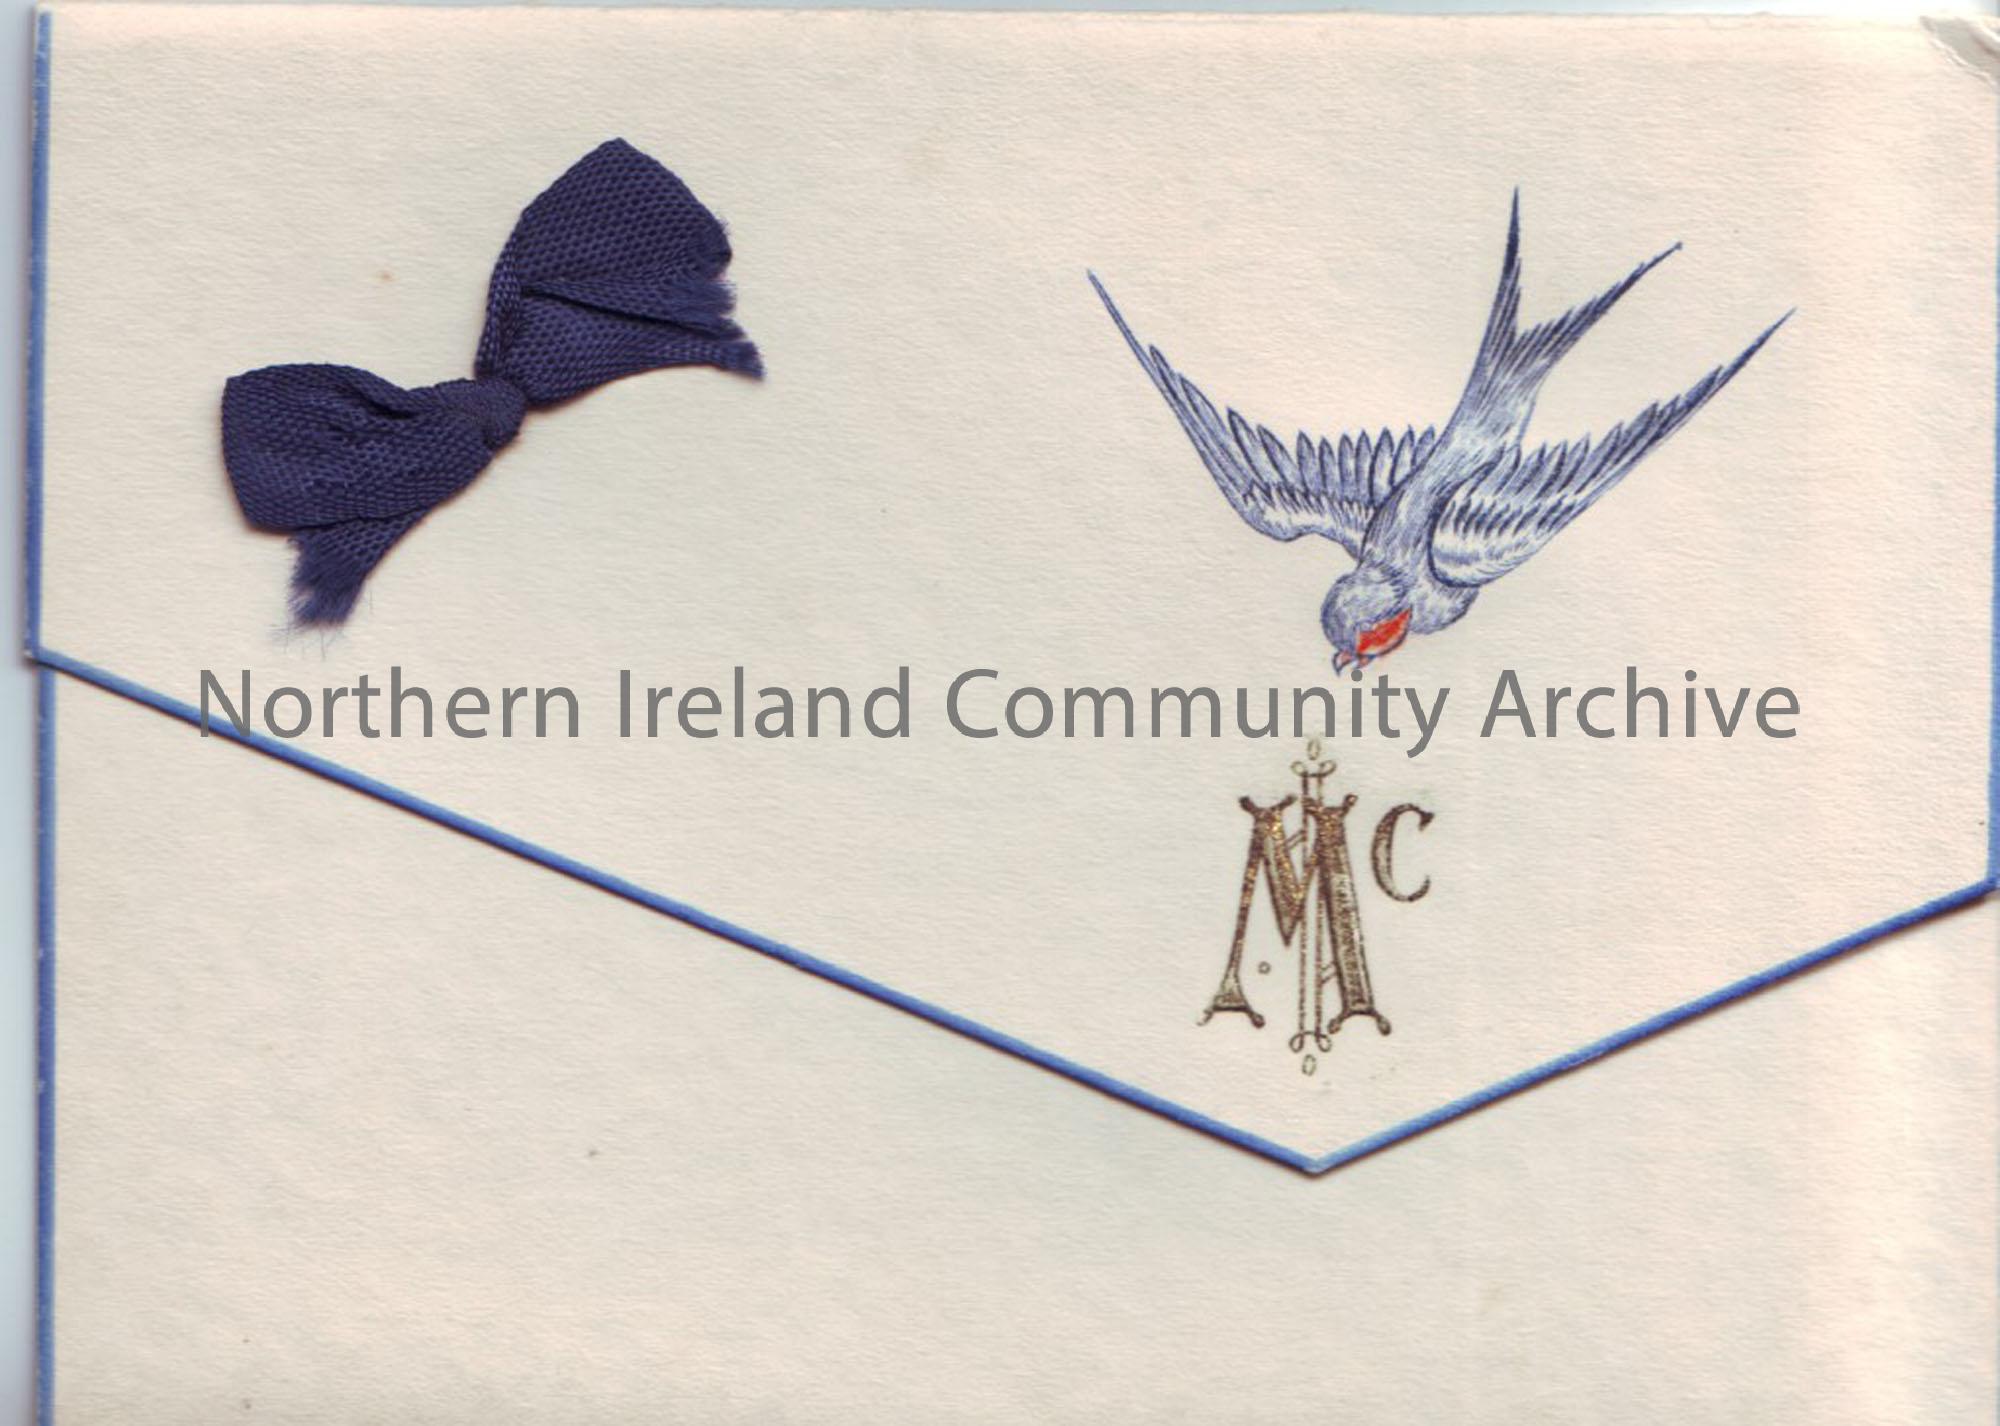 Christmas card, with verse inside. Initialled ‘Mc’ on front and blue bird. From Mr and Mrs F. J. McLoughlin, 6 Market Road, Ballymena, 1934.